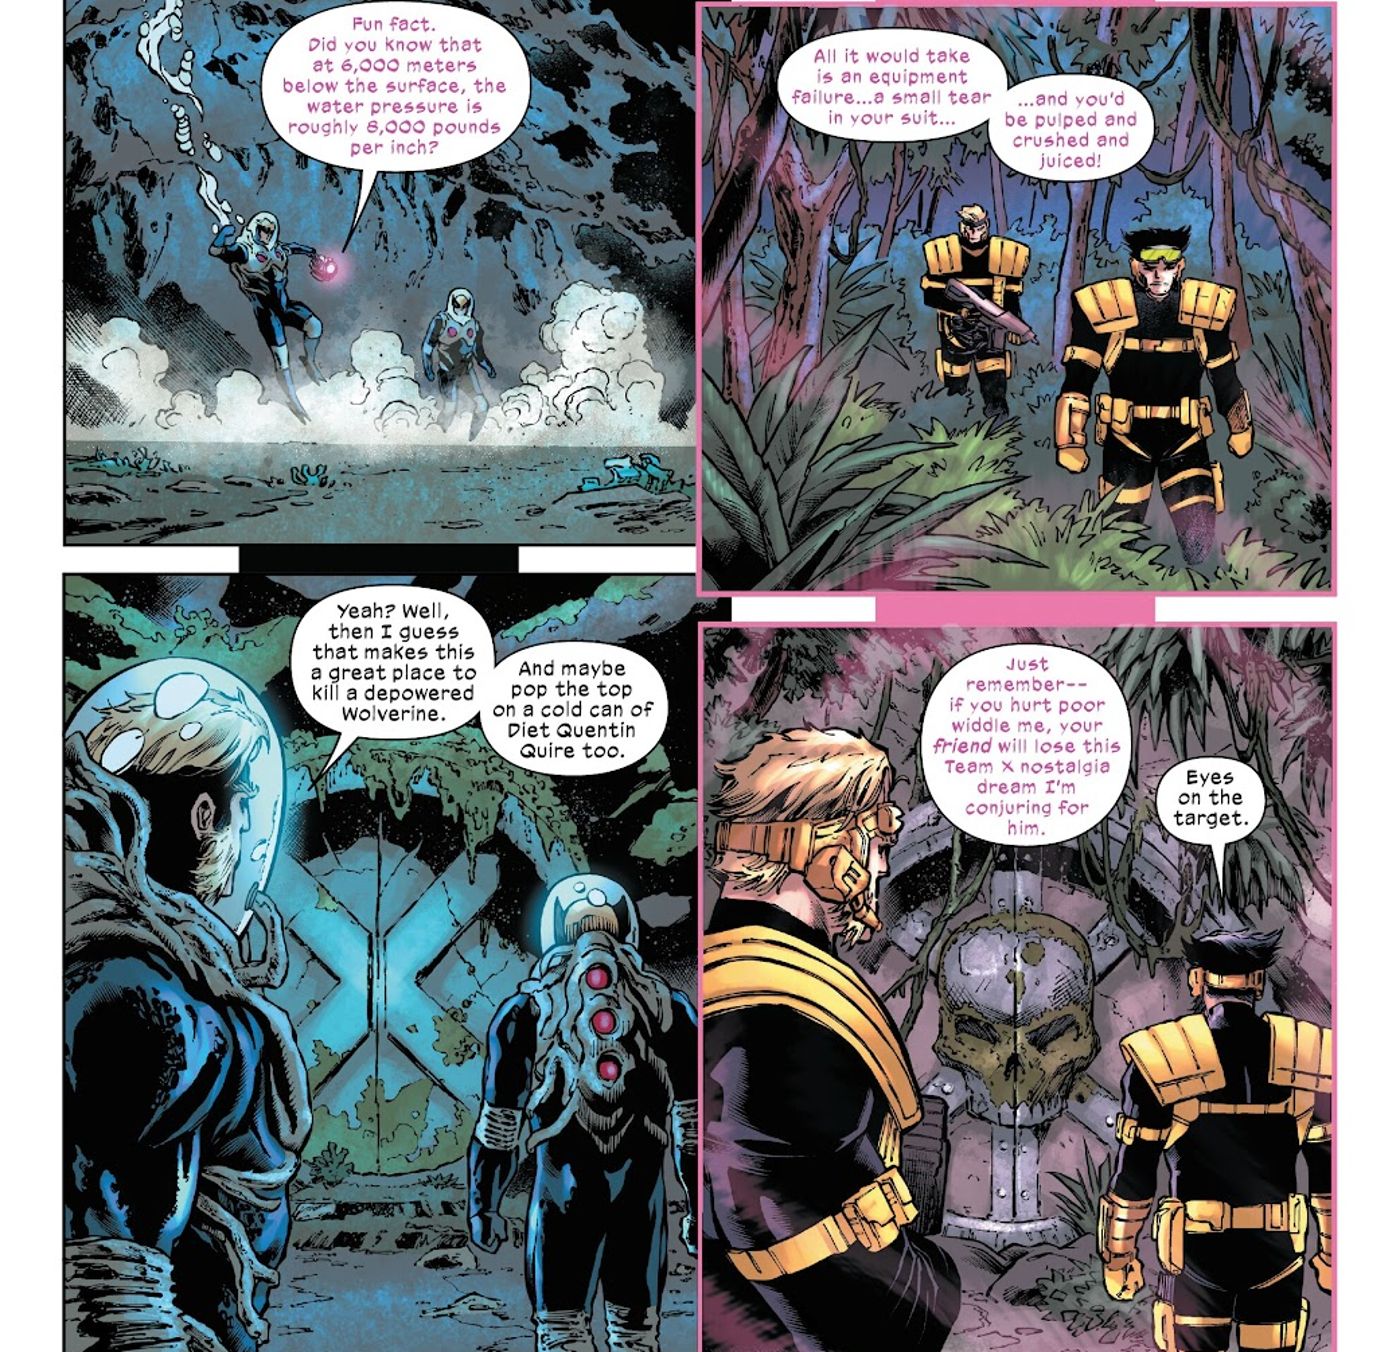 Sabretooth taunts Kid Omega about killing a depowered Wolverine. The image is split between reality (left) and the psychic X-Team illusion (right). 